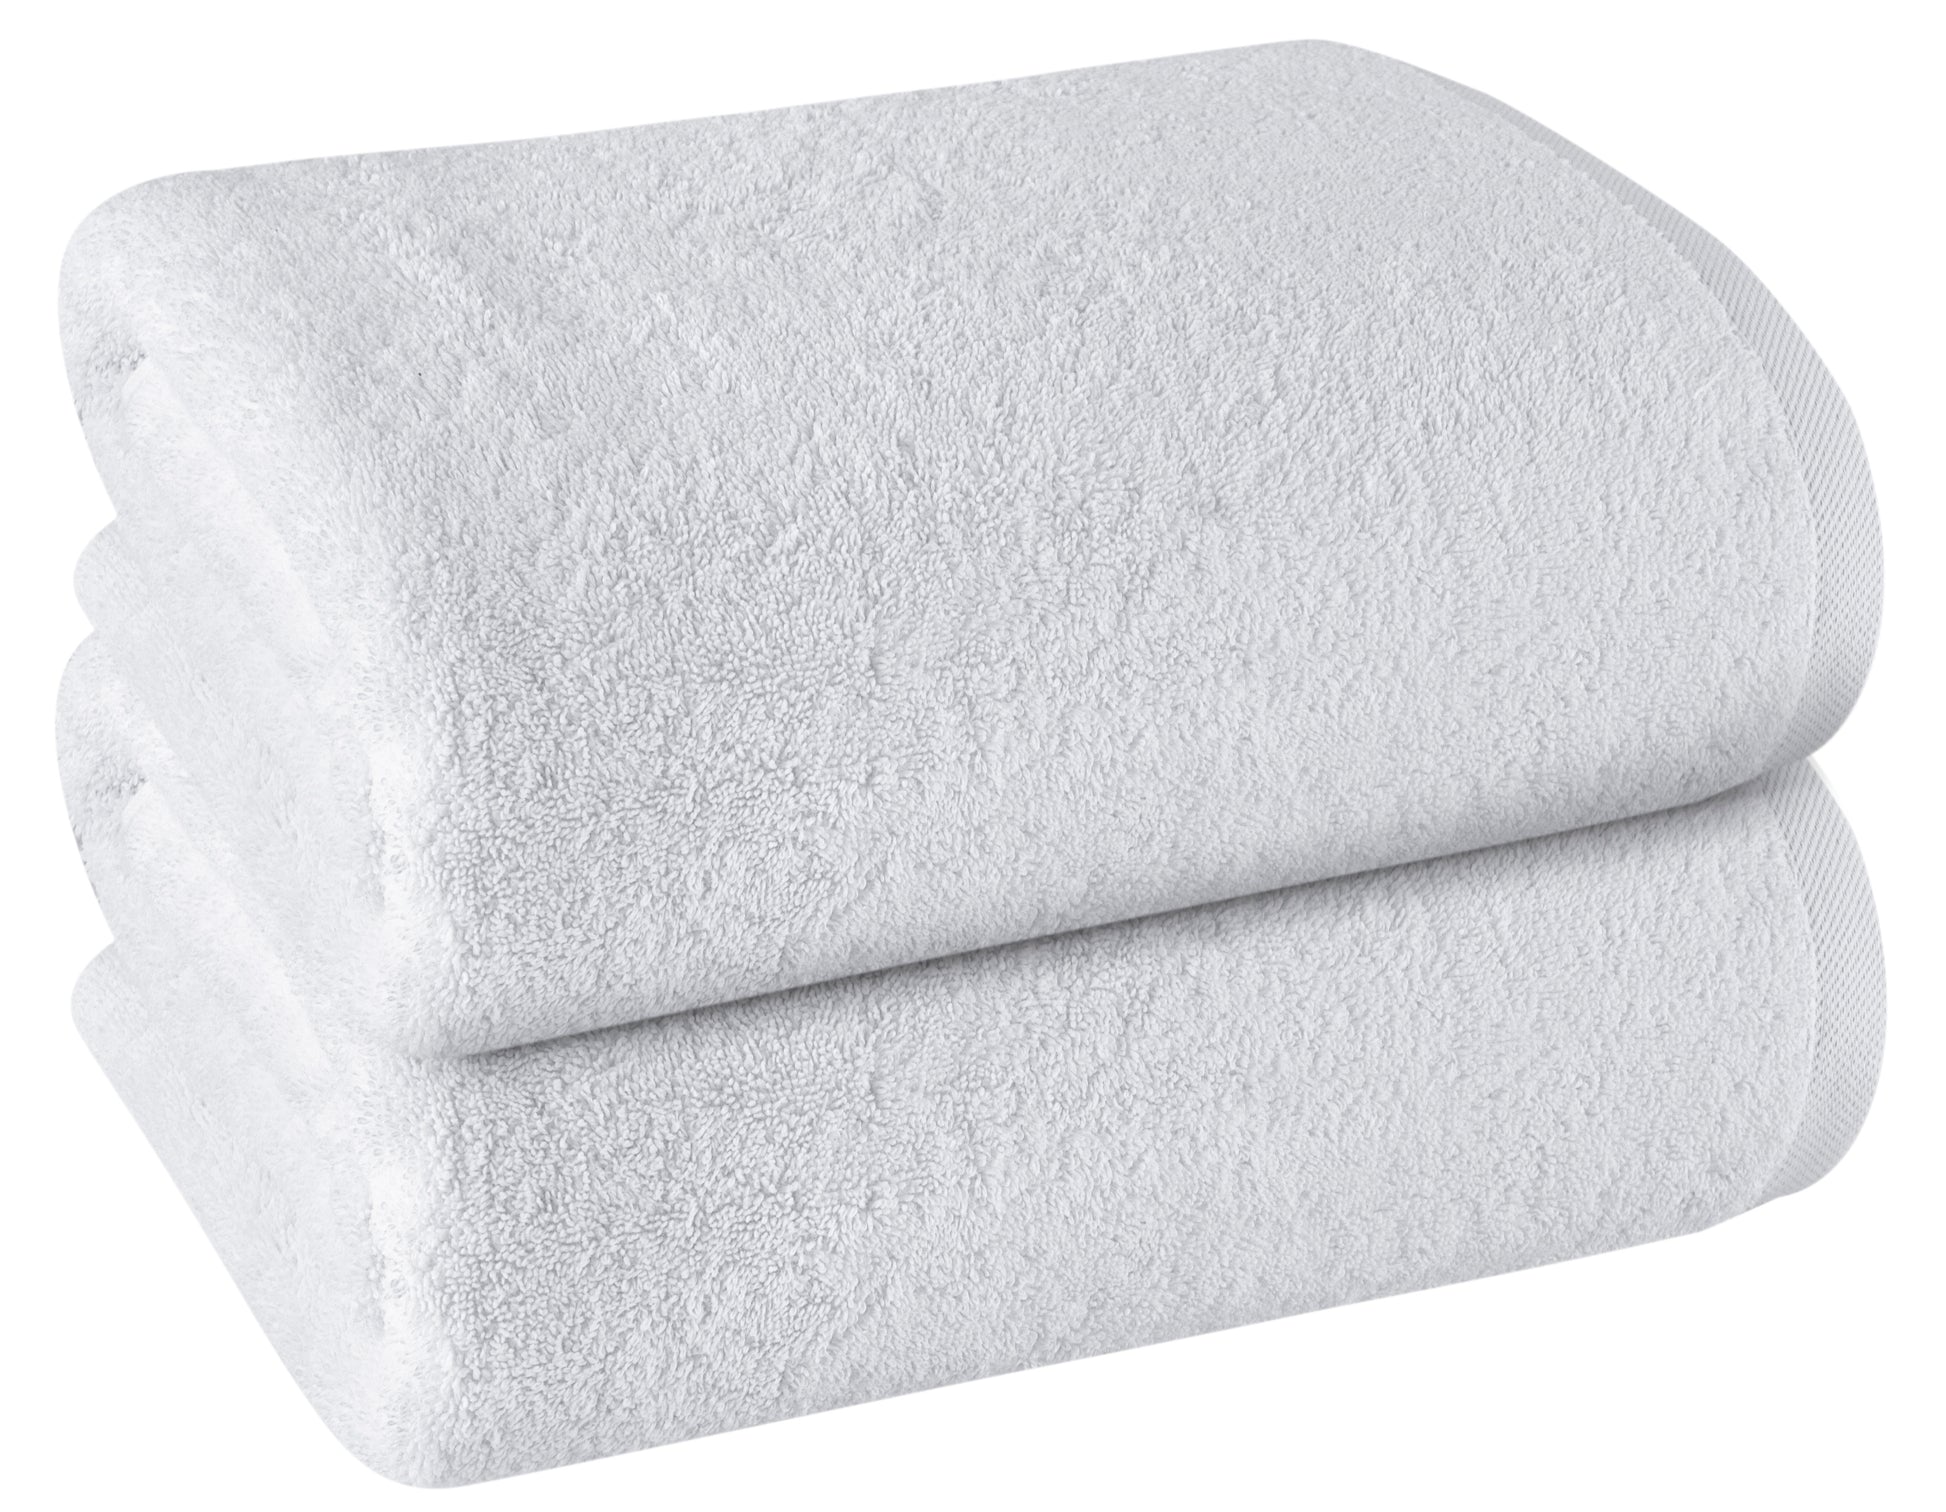 SALBAKOS Luxurious Jumbo Bath Sheet - 40x80 Clearance, 100% Genuine Turkish  Cotton Oversized Bath Towels, Super Soft, Quick Dry, Highly Absorbent 